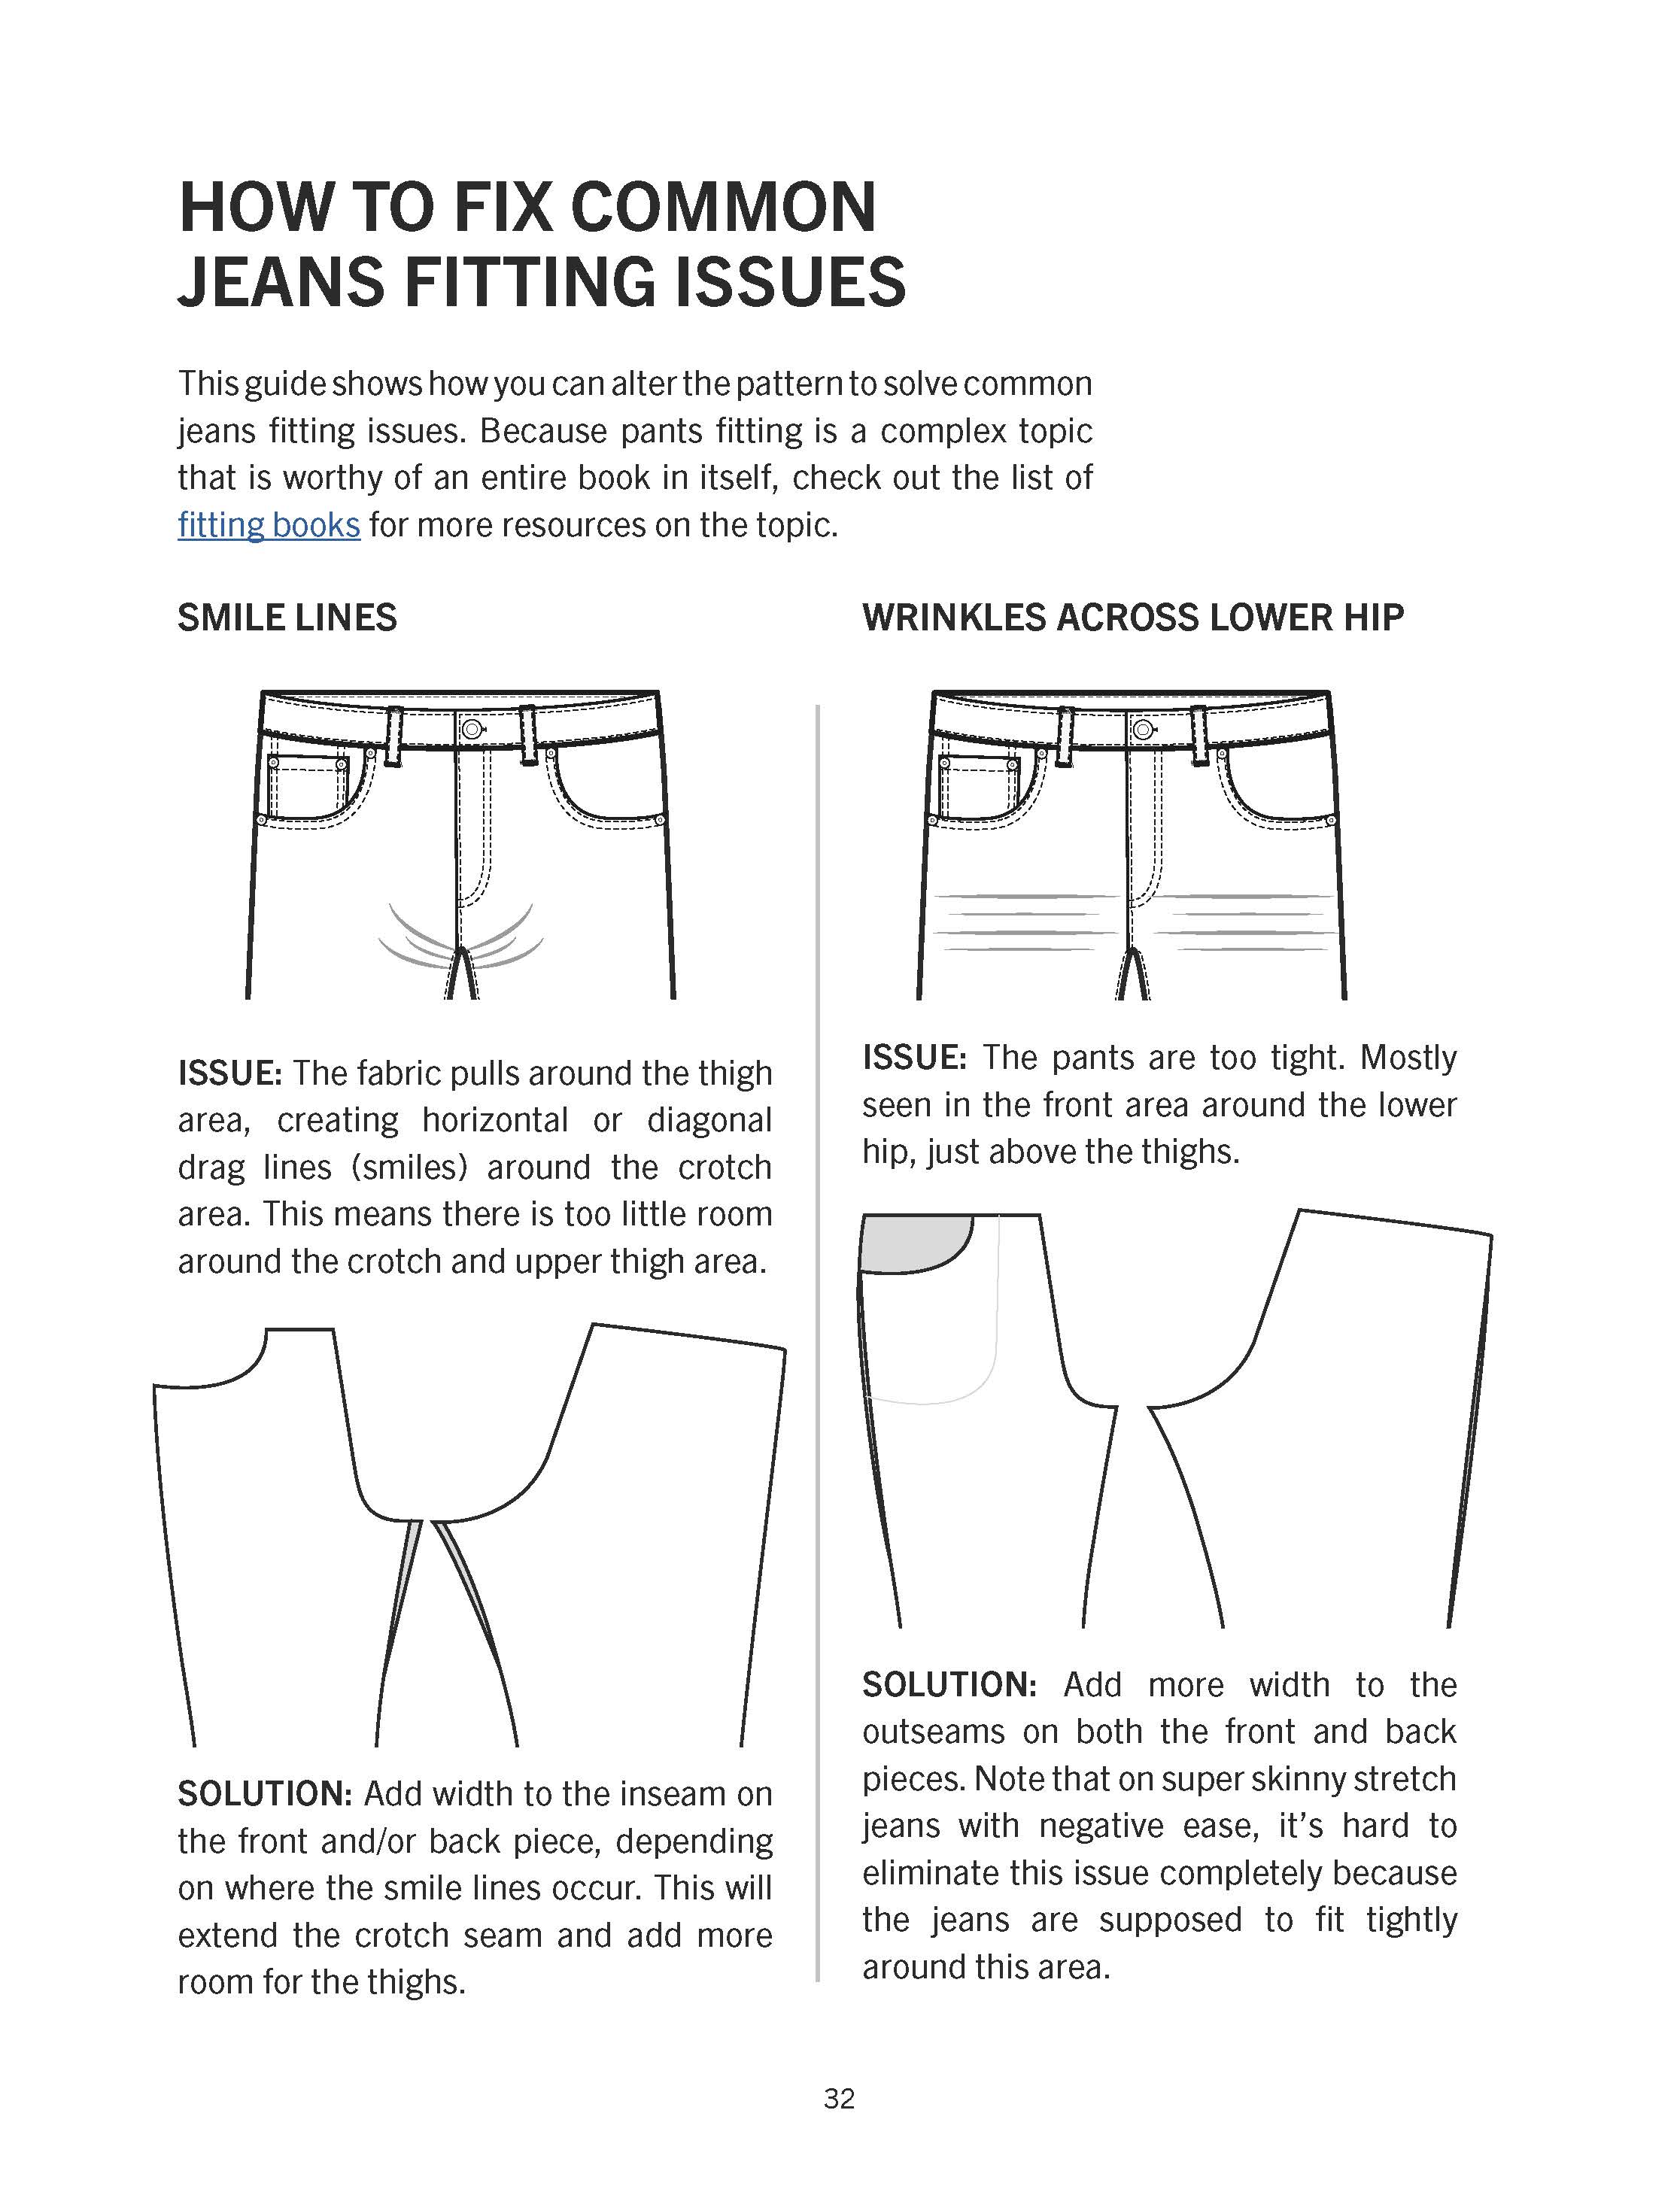 Master the Coverstitch Machine + Sewing Jeans + Sewing Activewear – Ebook Bundle (PDF)